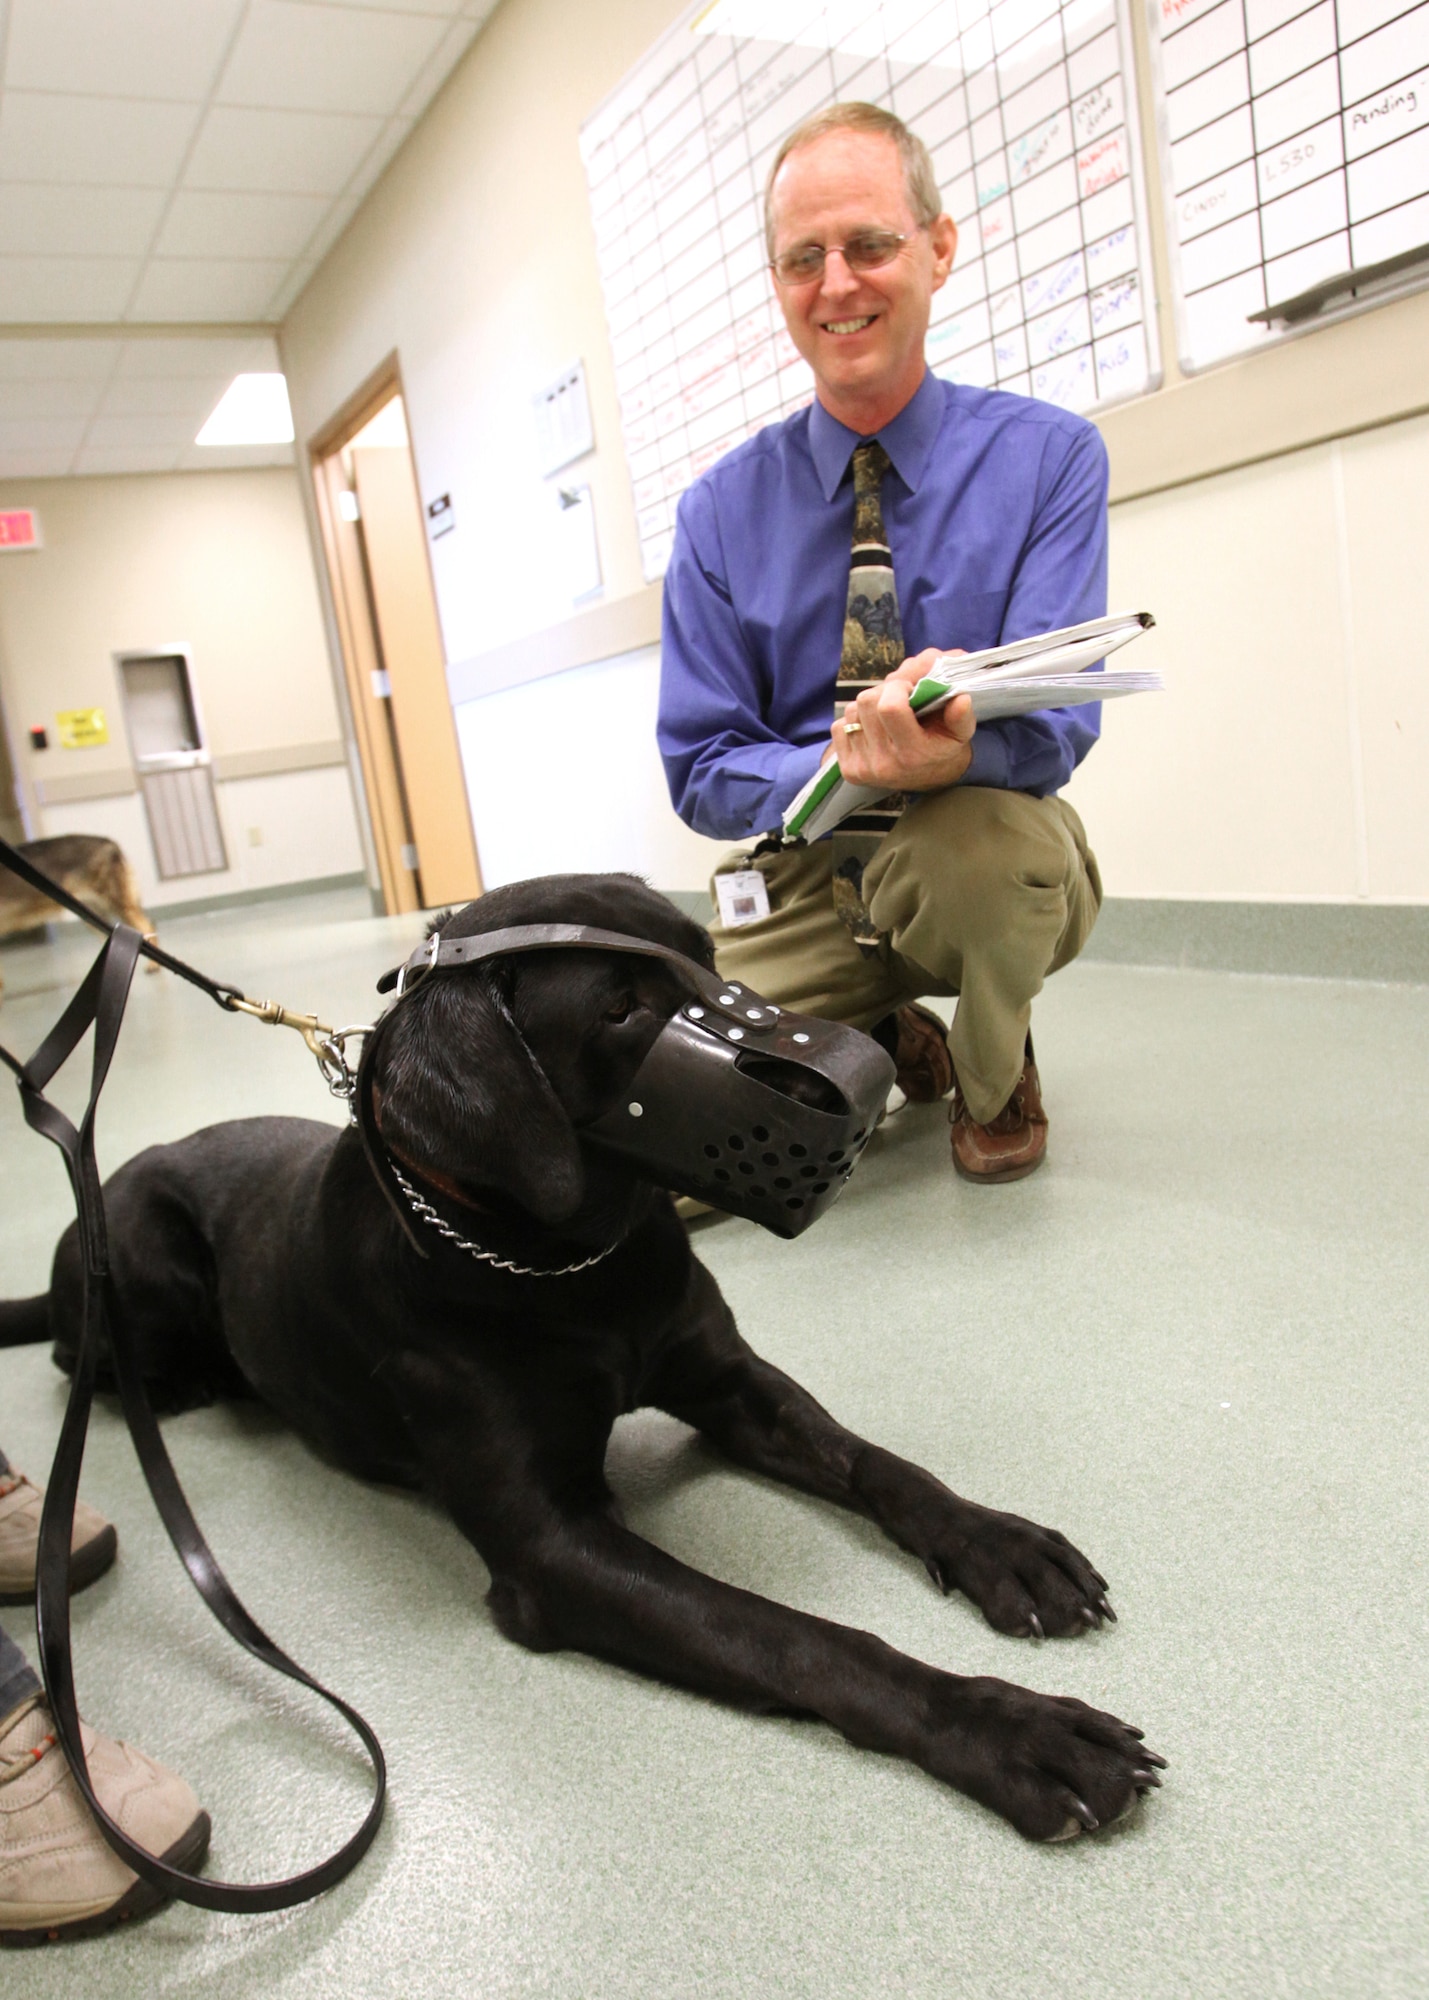 Dr. Walter F. Burghardt Jr. evaluates the behavior of a military working dog. Burghardt is the chief of Behavioral Medicine and Military Working Dog Studies at LTC Daniel E. Holland Memorial Military Working Dog Hospital at Joint Base San Antonio-Lackland.